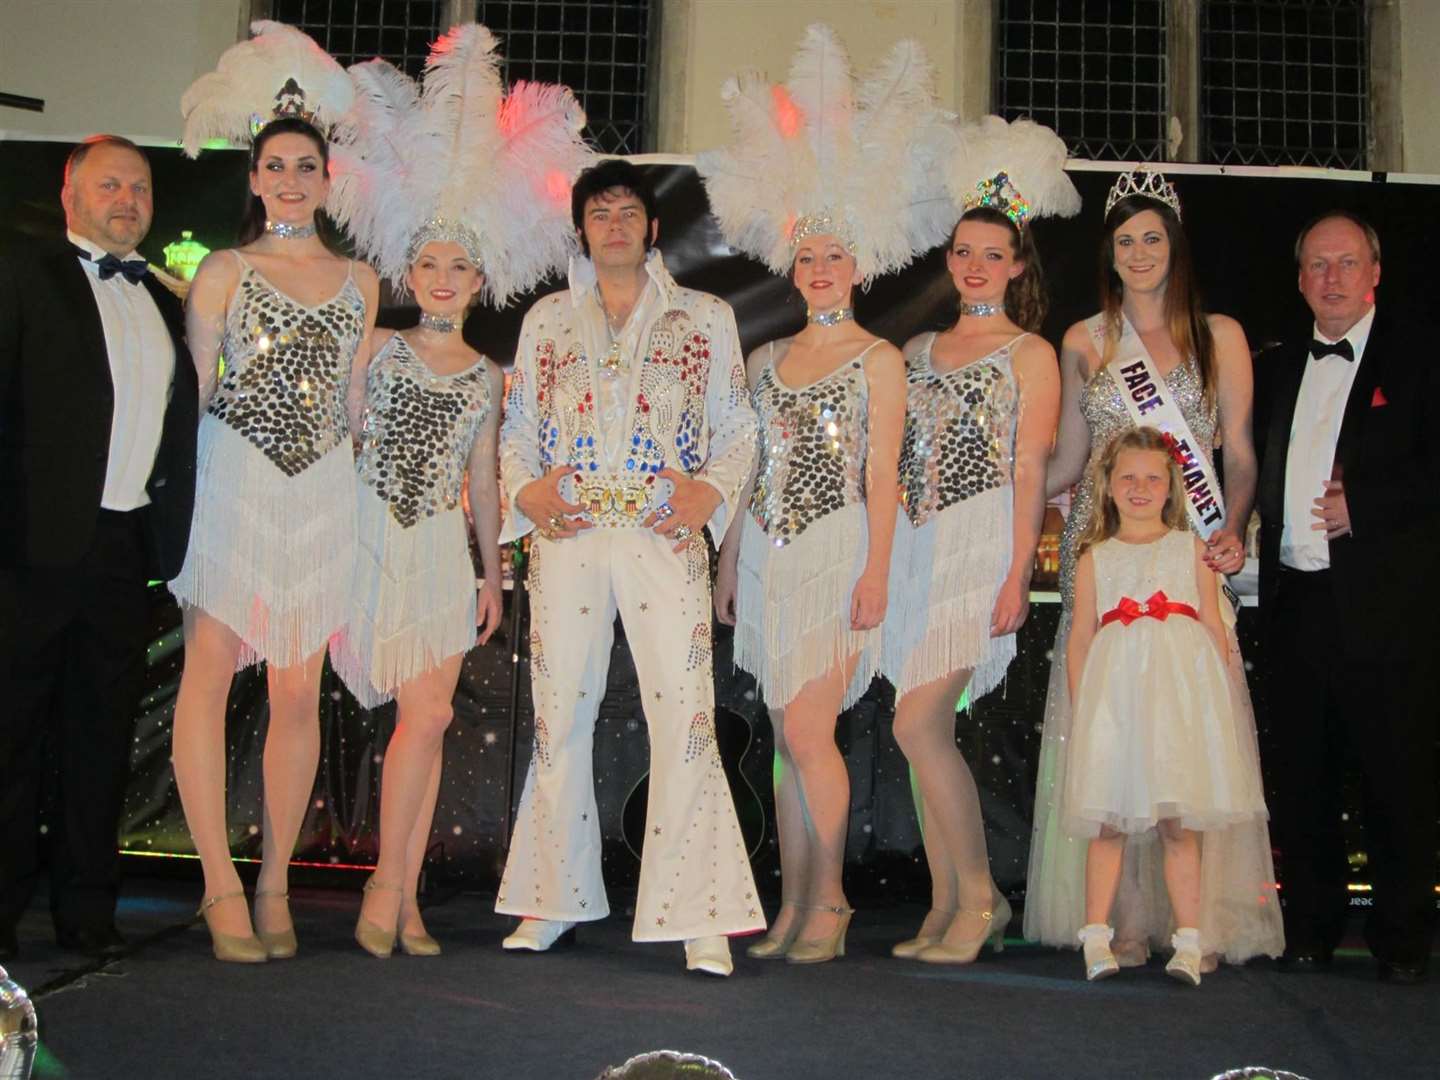 Colin Smith, MBE, far left, at an event he organised with an Elvis tribute at the Landmark Centre, Deal in aid of The Katie Piper Foundation